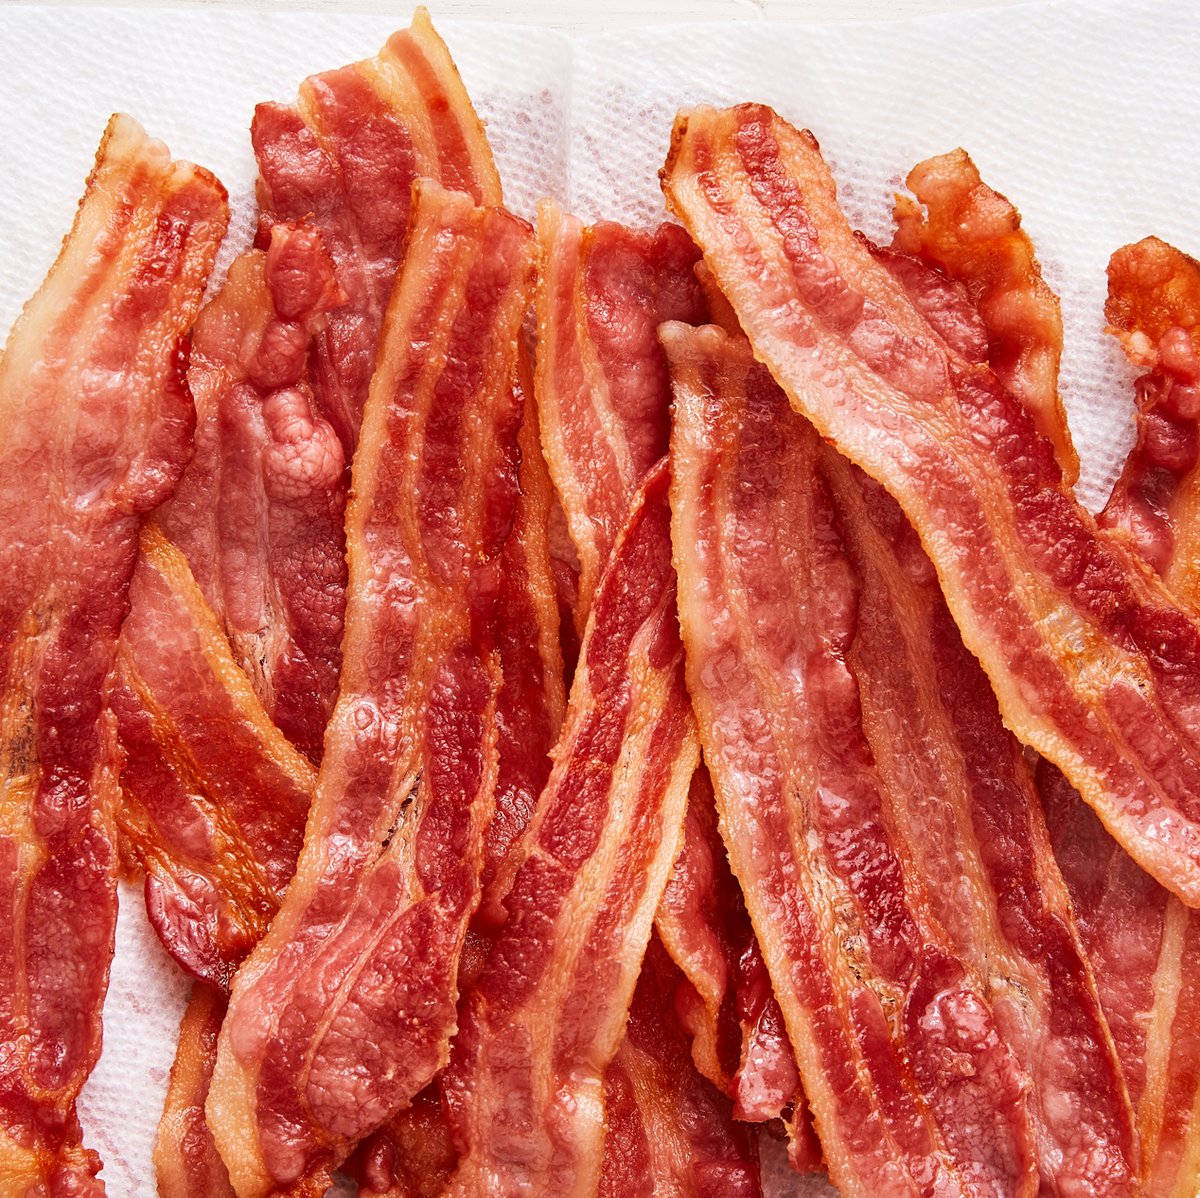 How To Make Quick & Easy Bacon in the Microwave